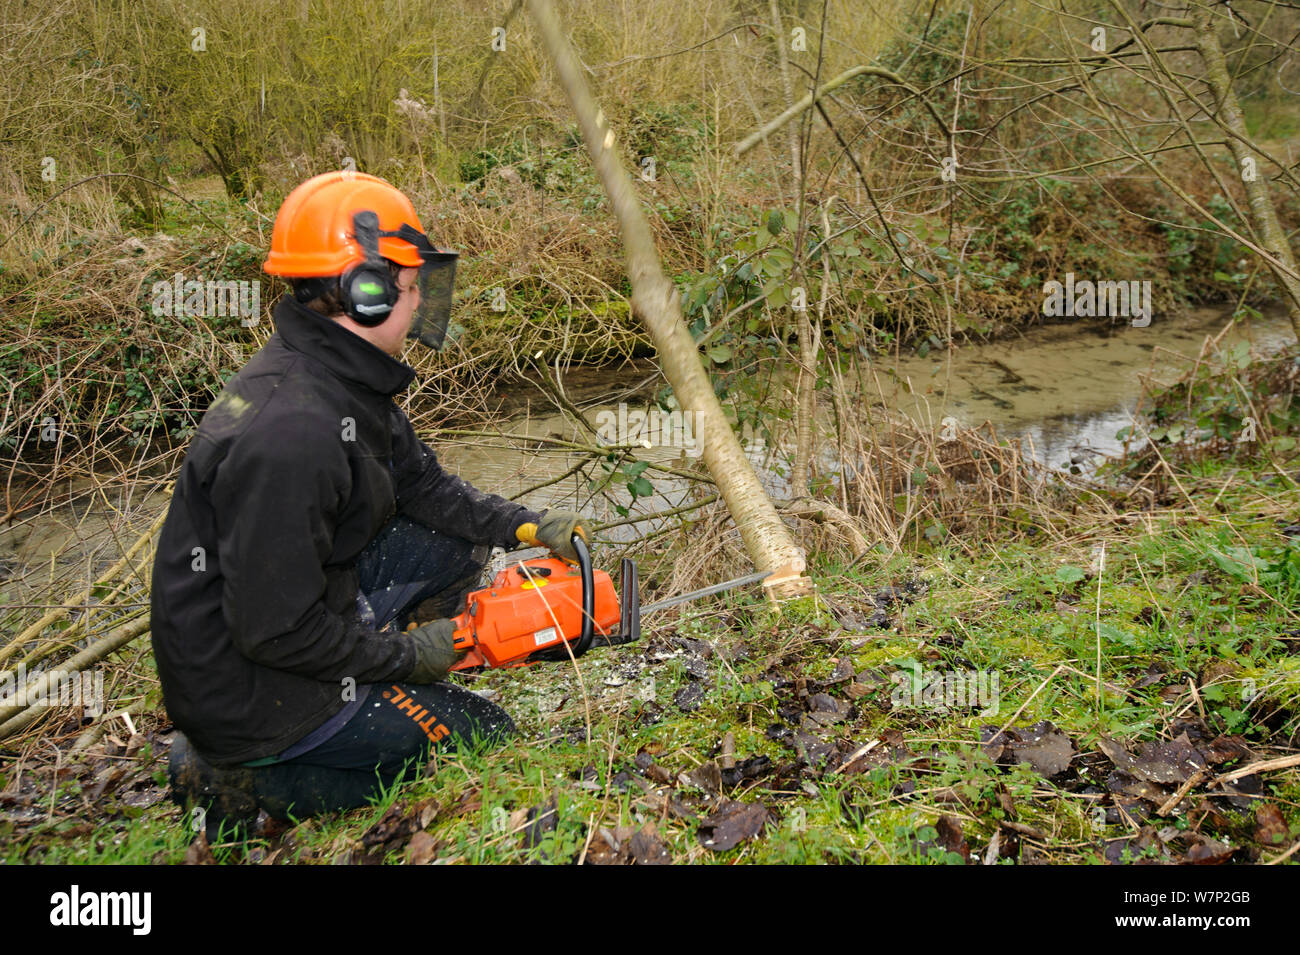 A volunteer from Wildwood trust cuts down tree to improve improve water vole habitat on a stream in Kent and to allow growth of bankside vegetation, East Malling, Kent England, February 2011 Stock Photo